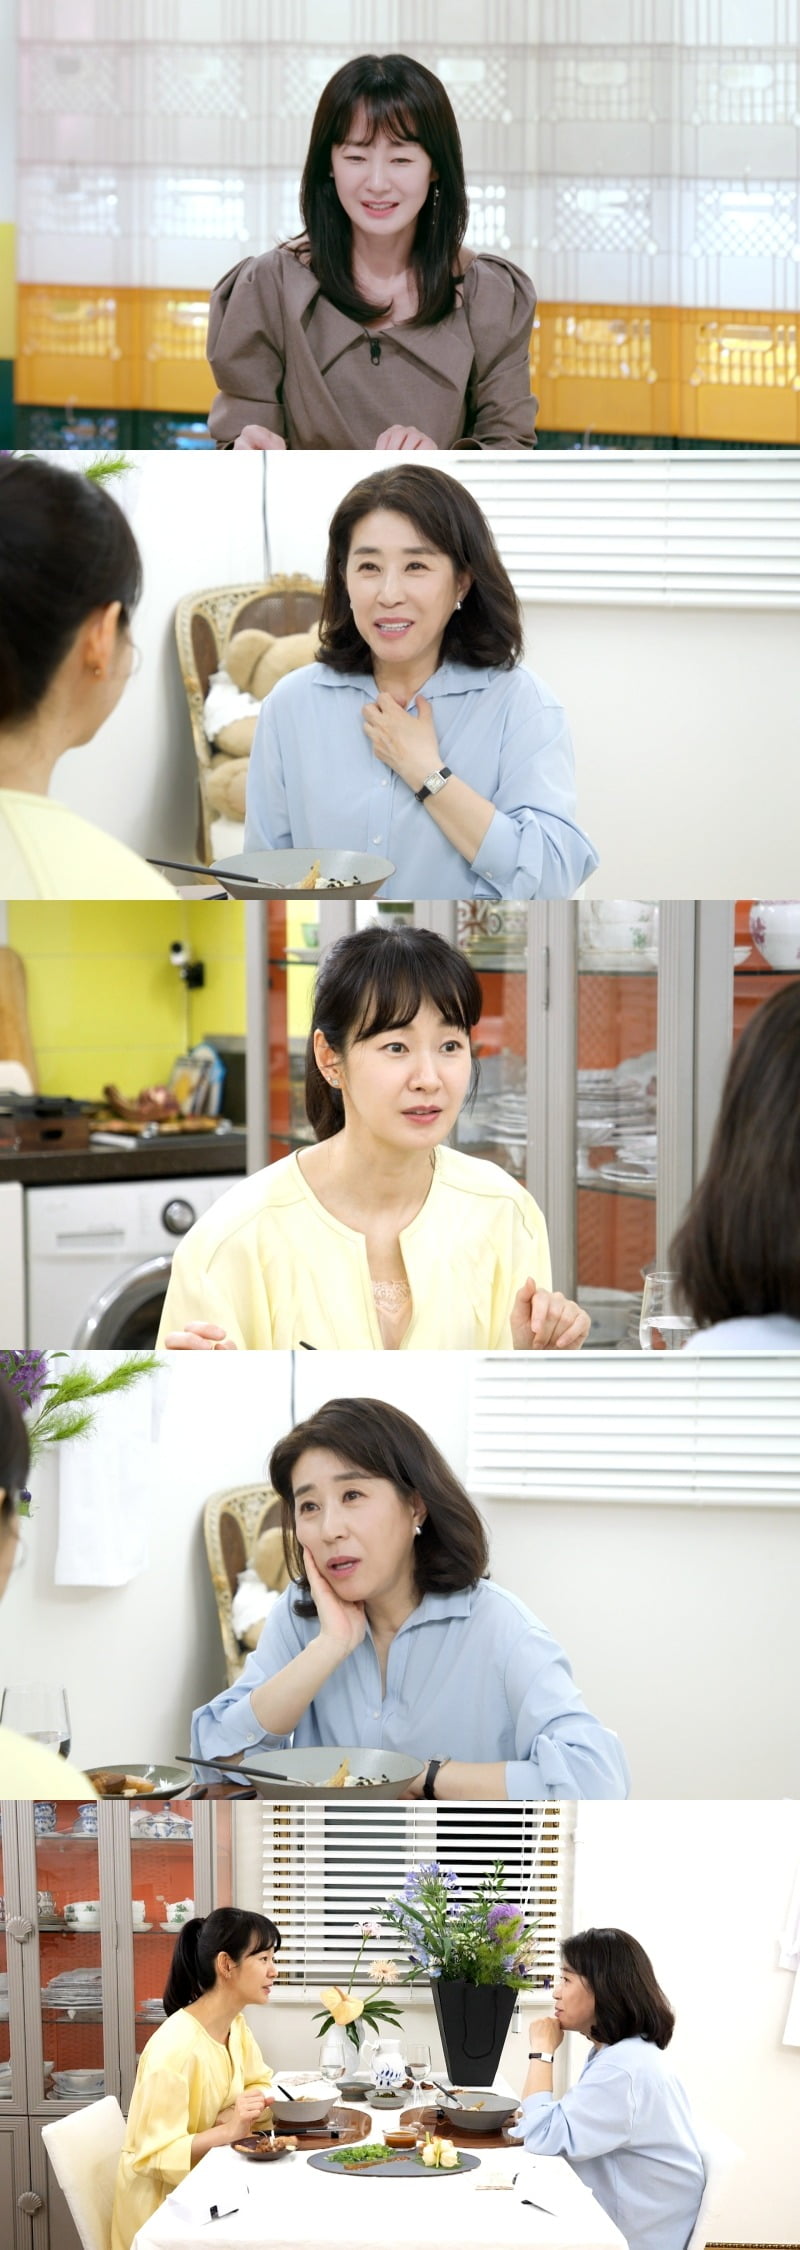 Kim Mi-kyung, who plays Park Shin-hye's mother in 'The Heirs', confessed to her unexpected hobby